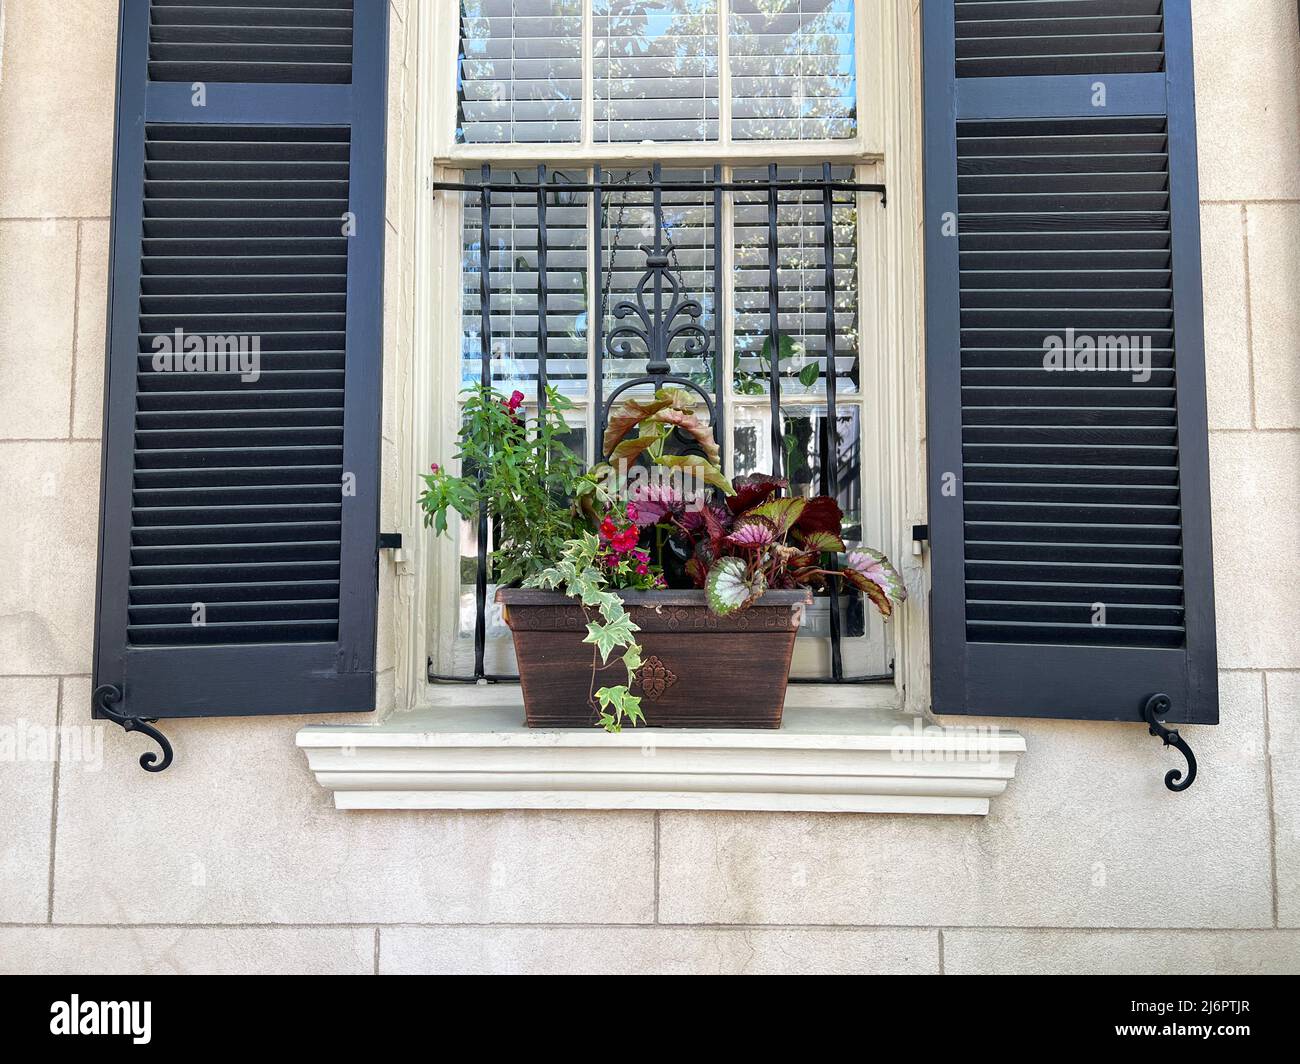 A window planter box seen in the historic district of Savannah, Georgia, a popular slow travel tourism destination in the southeastern United States. Stock Photo